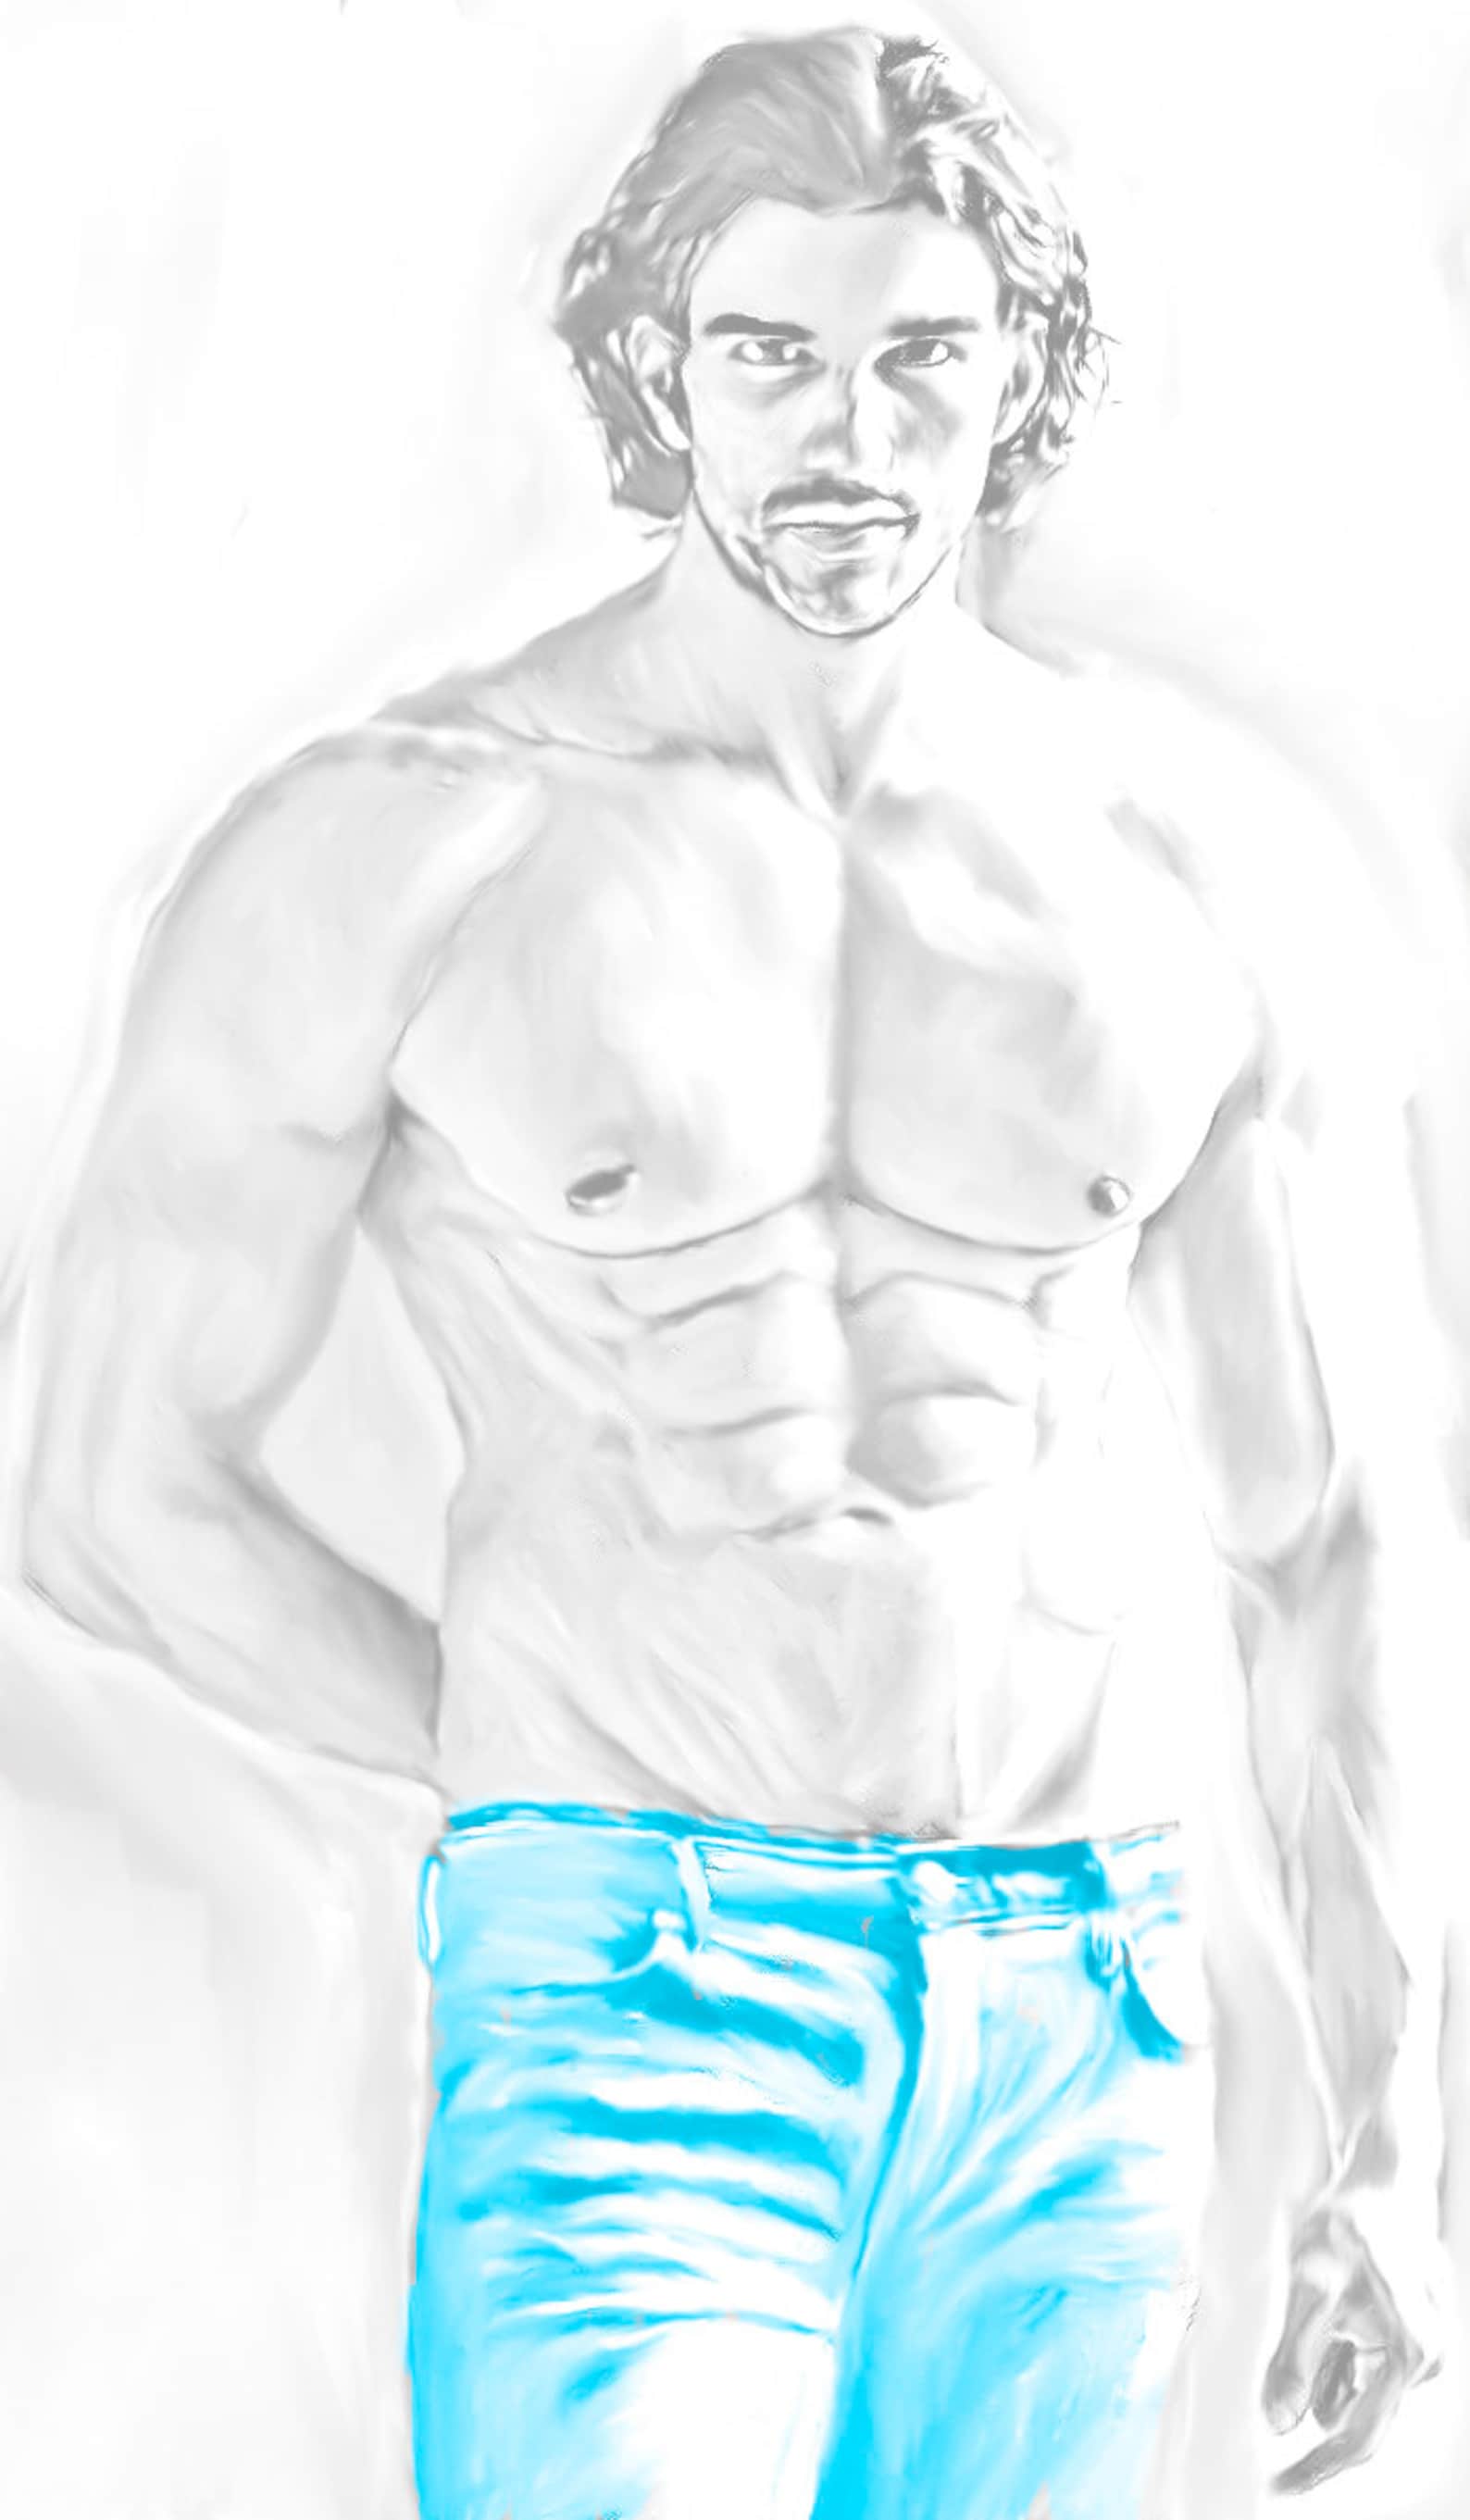 Shirtless Man Male Body Male Figure Pencil Drawing A Size Etsy